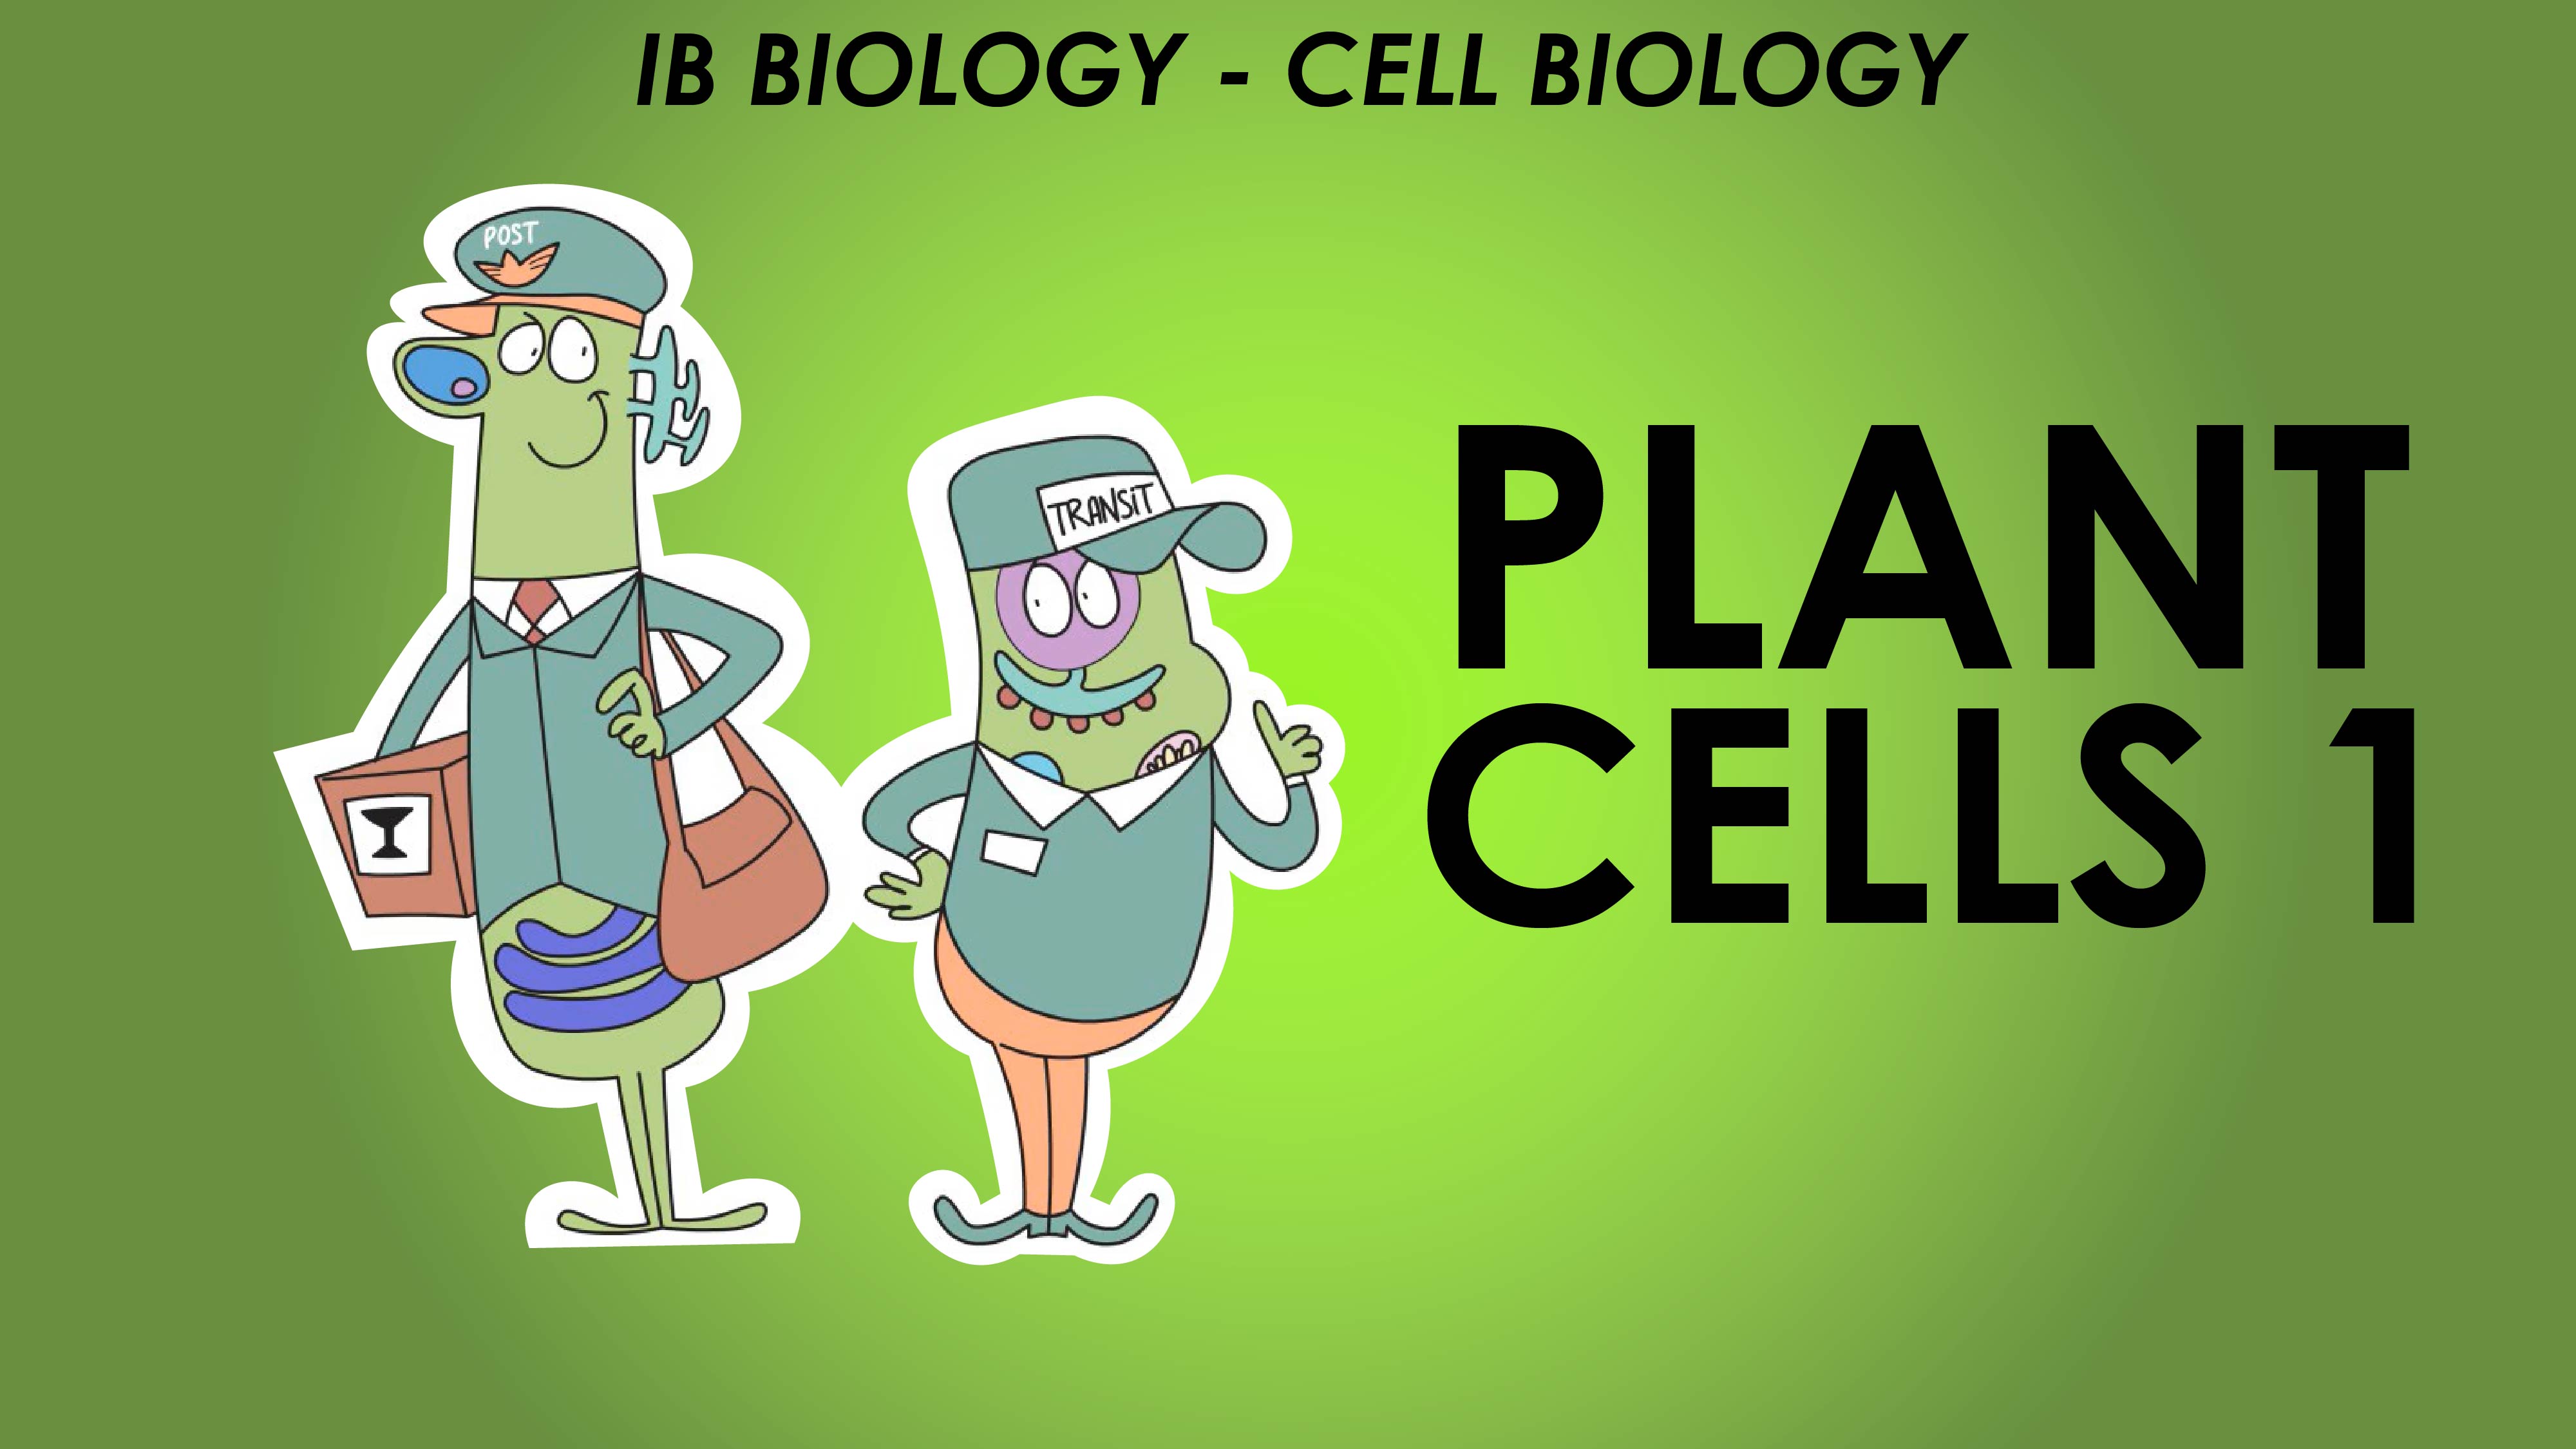 IB Cell Biology - Plant Cells 1 